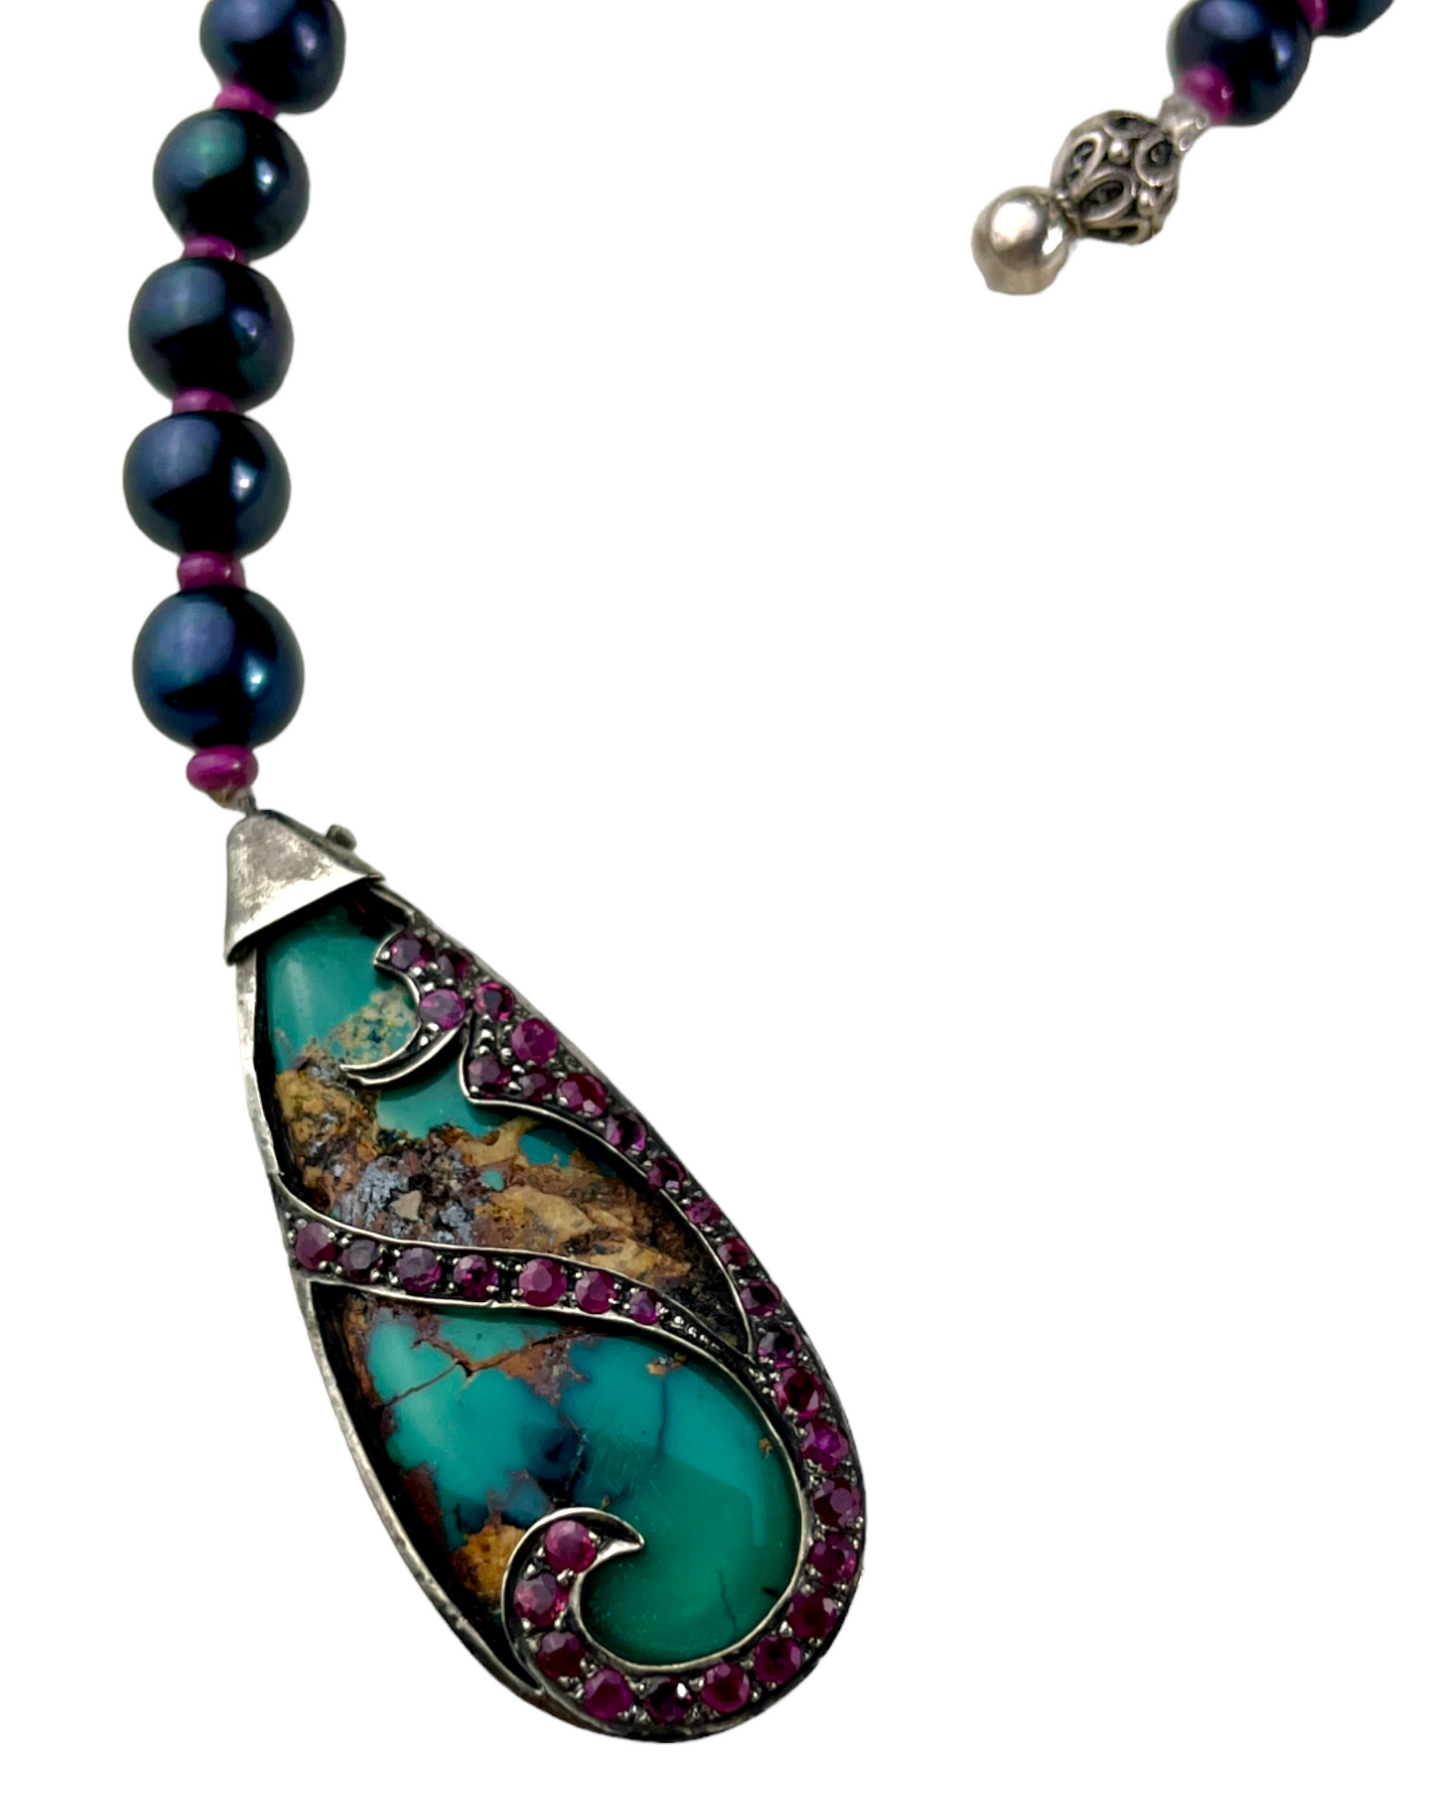 Namazte Majestic Rosary with Rubys, Turquoise and Pearls